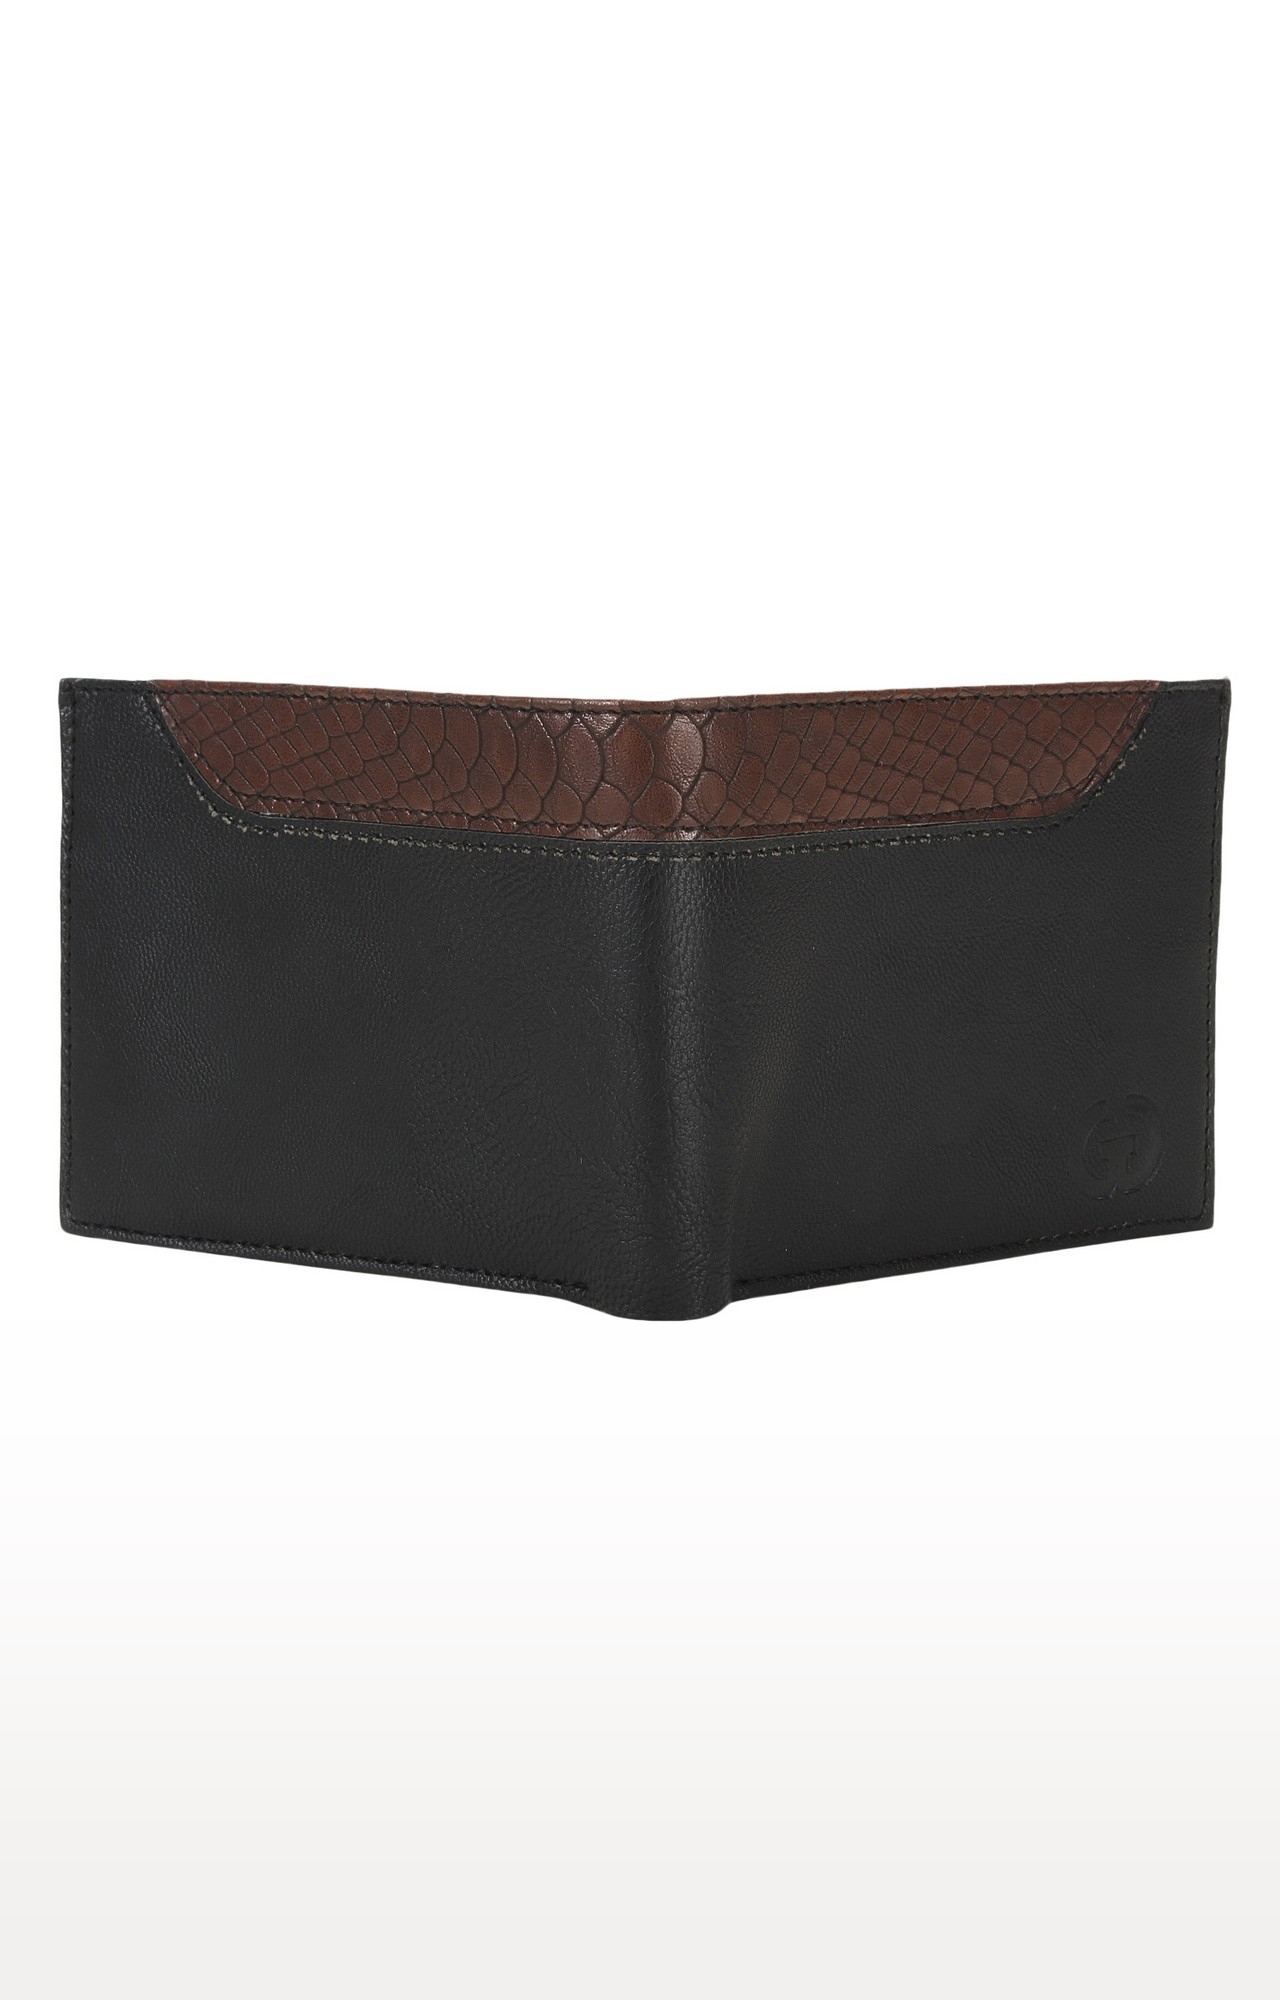 Greywood | Black and Brown Wallet and Analog Watch 5